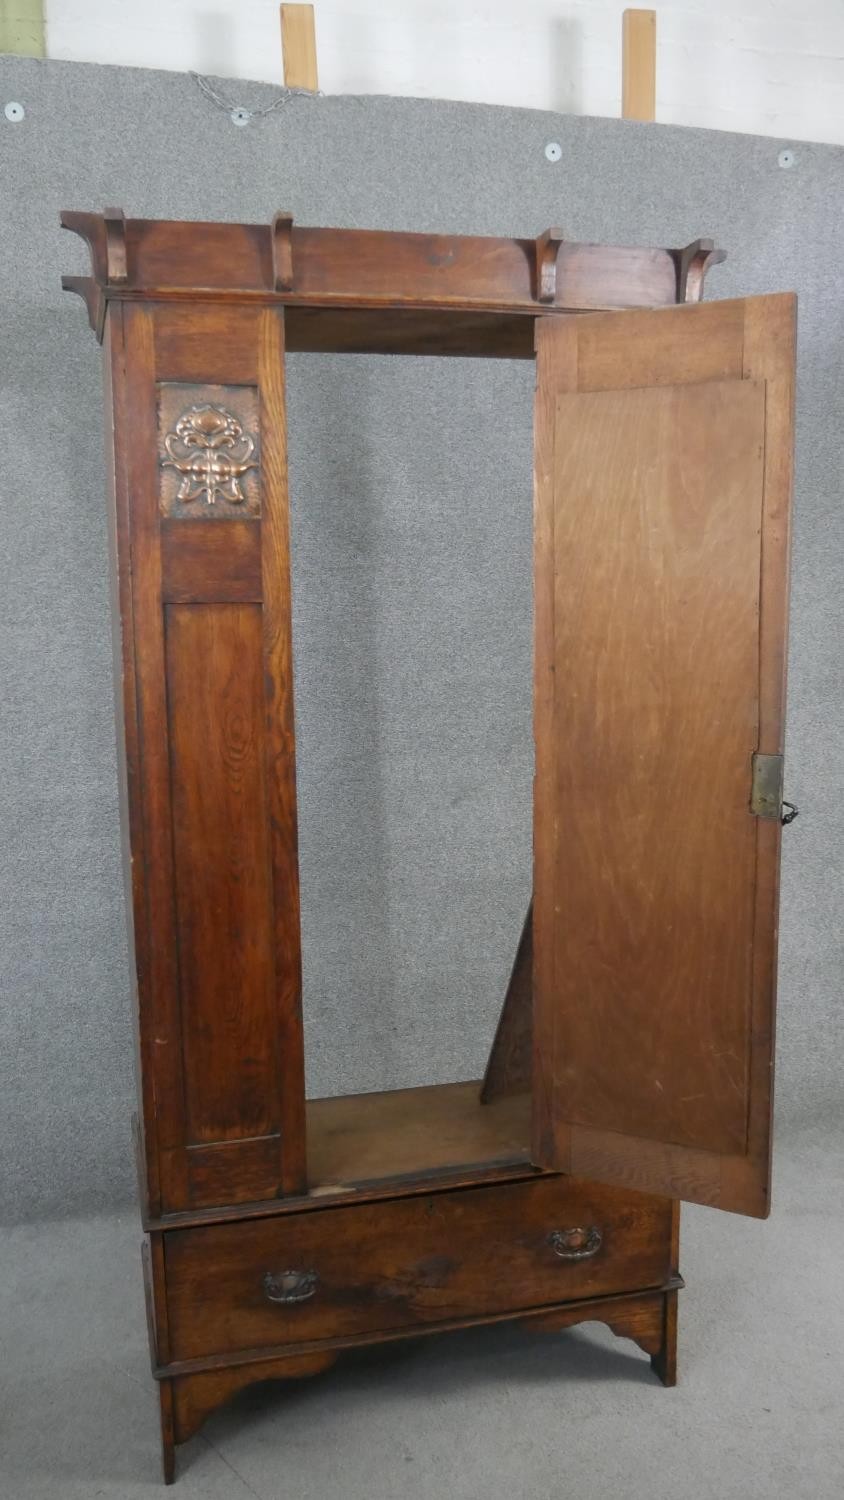 A late 19th century oak Arts and Crafts wardrobe with inset embossed copper panels. H.190 W.89 D. - Image 8 of 10